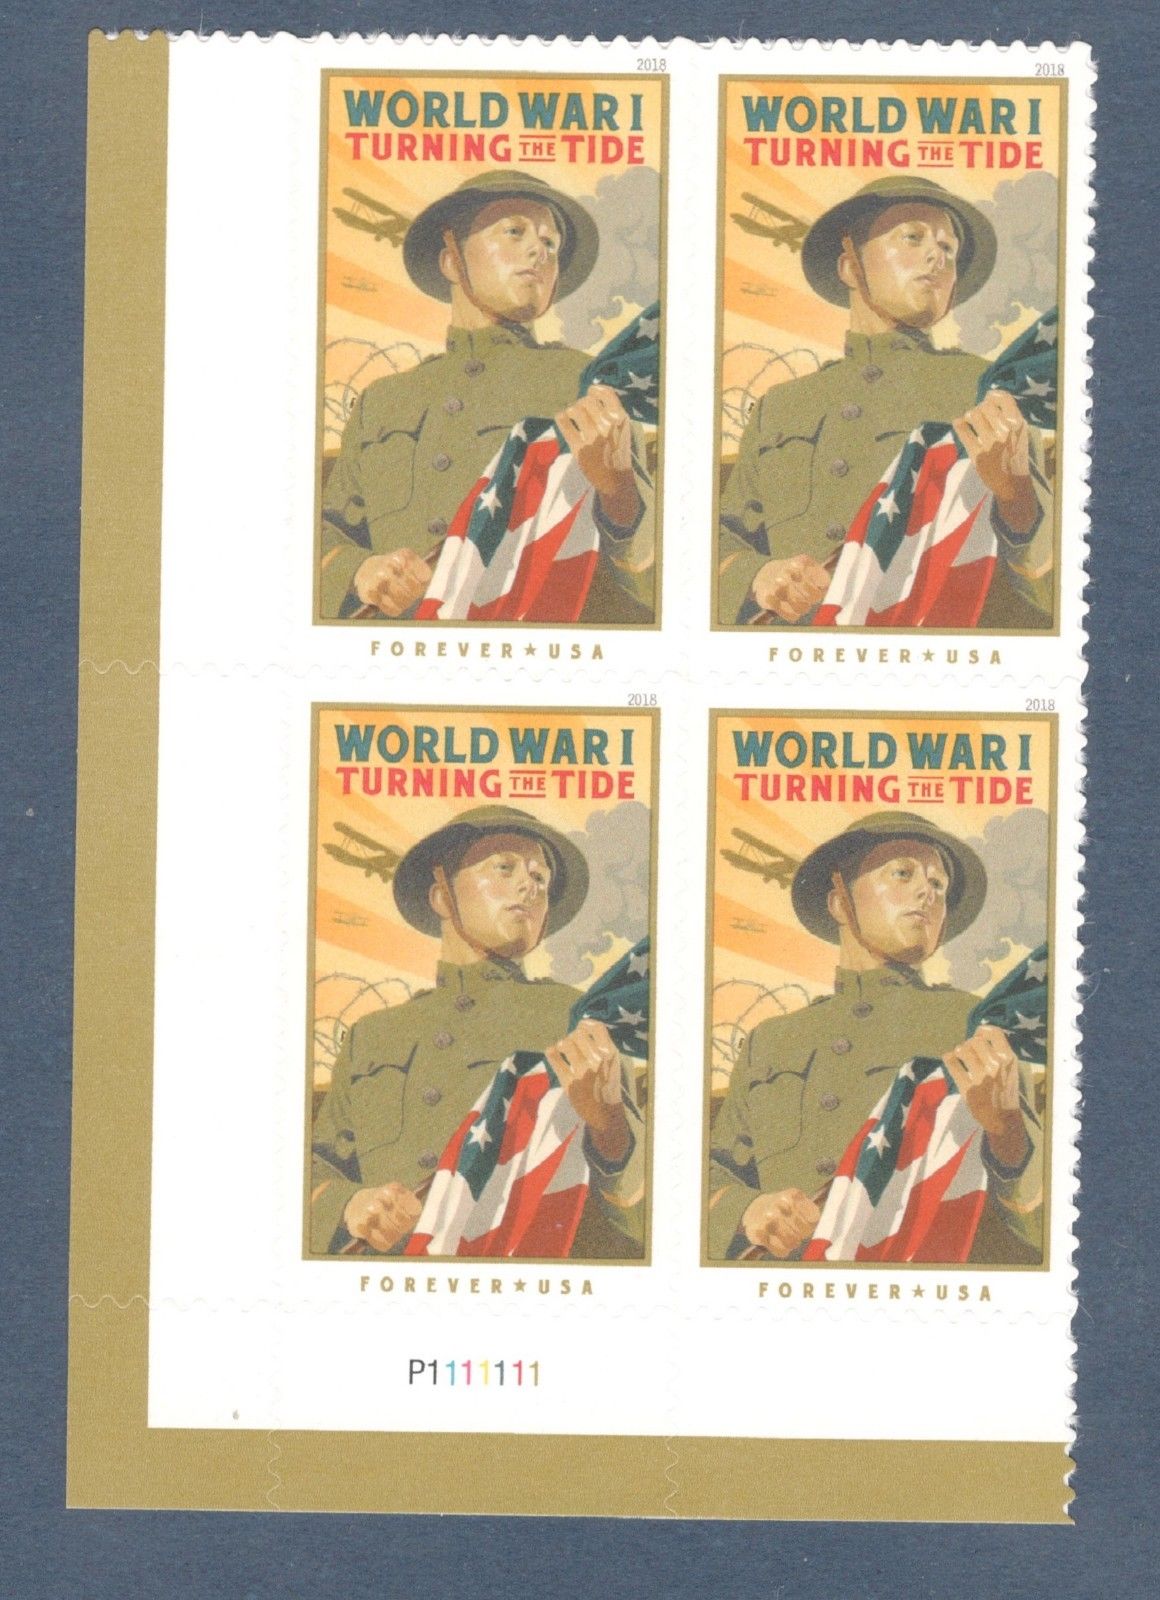 5300 Forever World War I Turning The Tide Mint Plate Block of 4 #5300pb